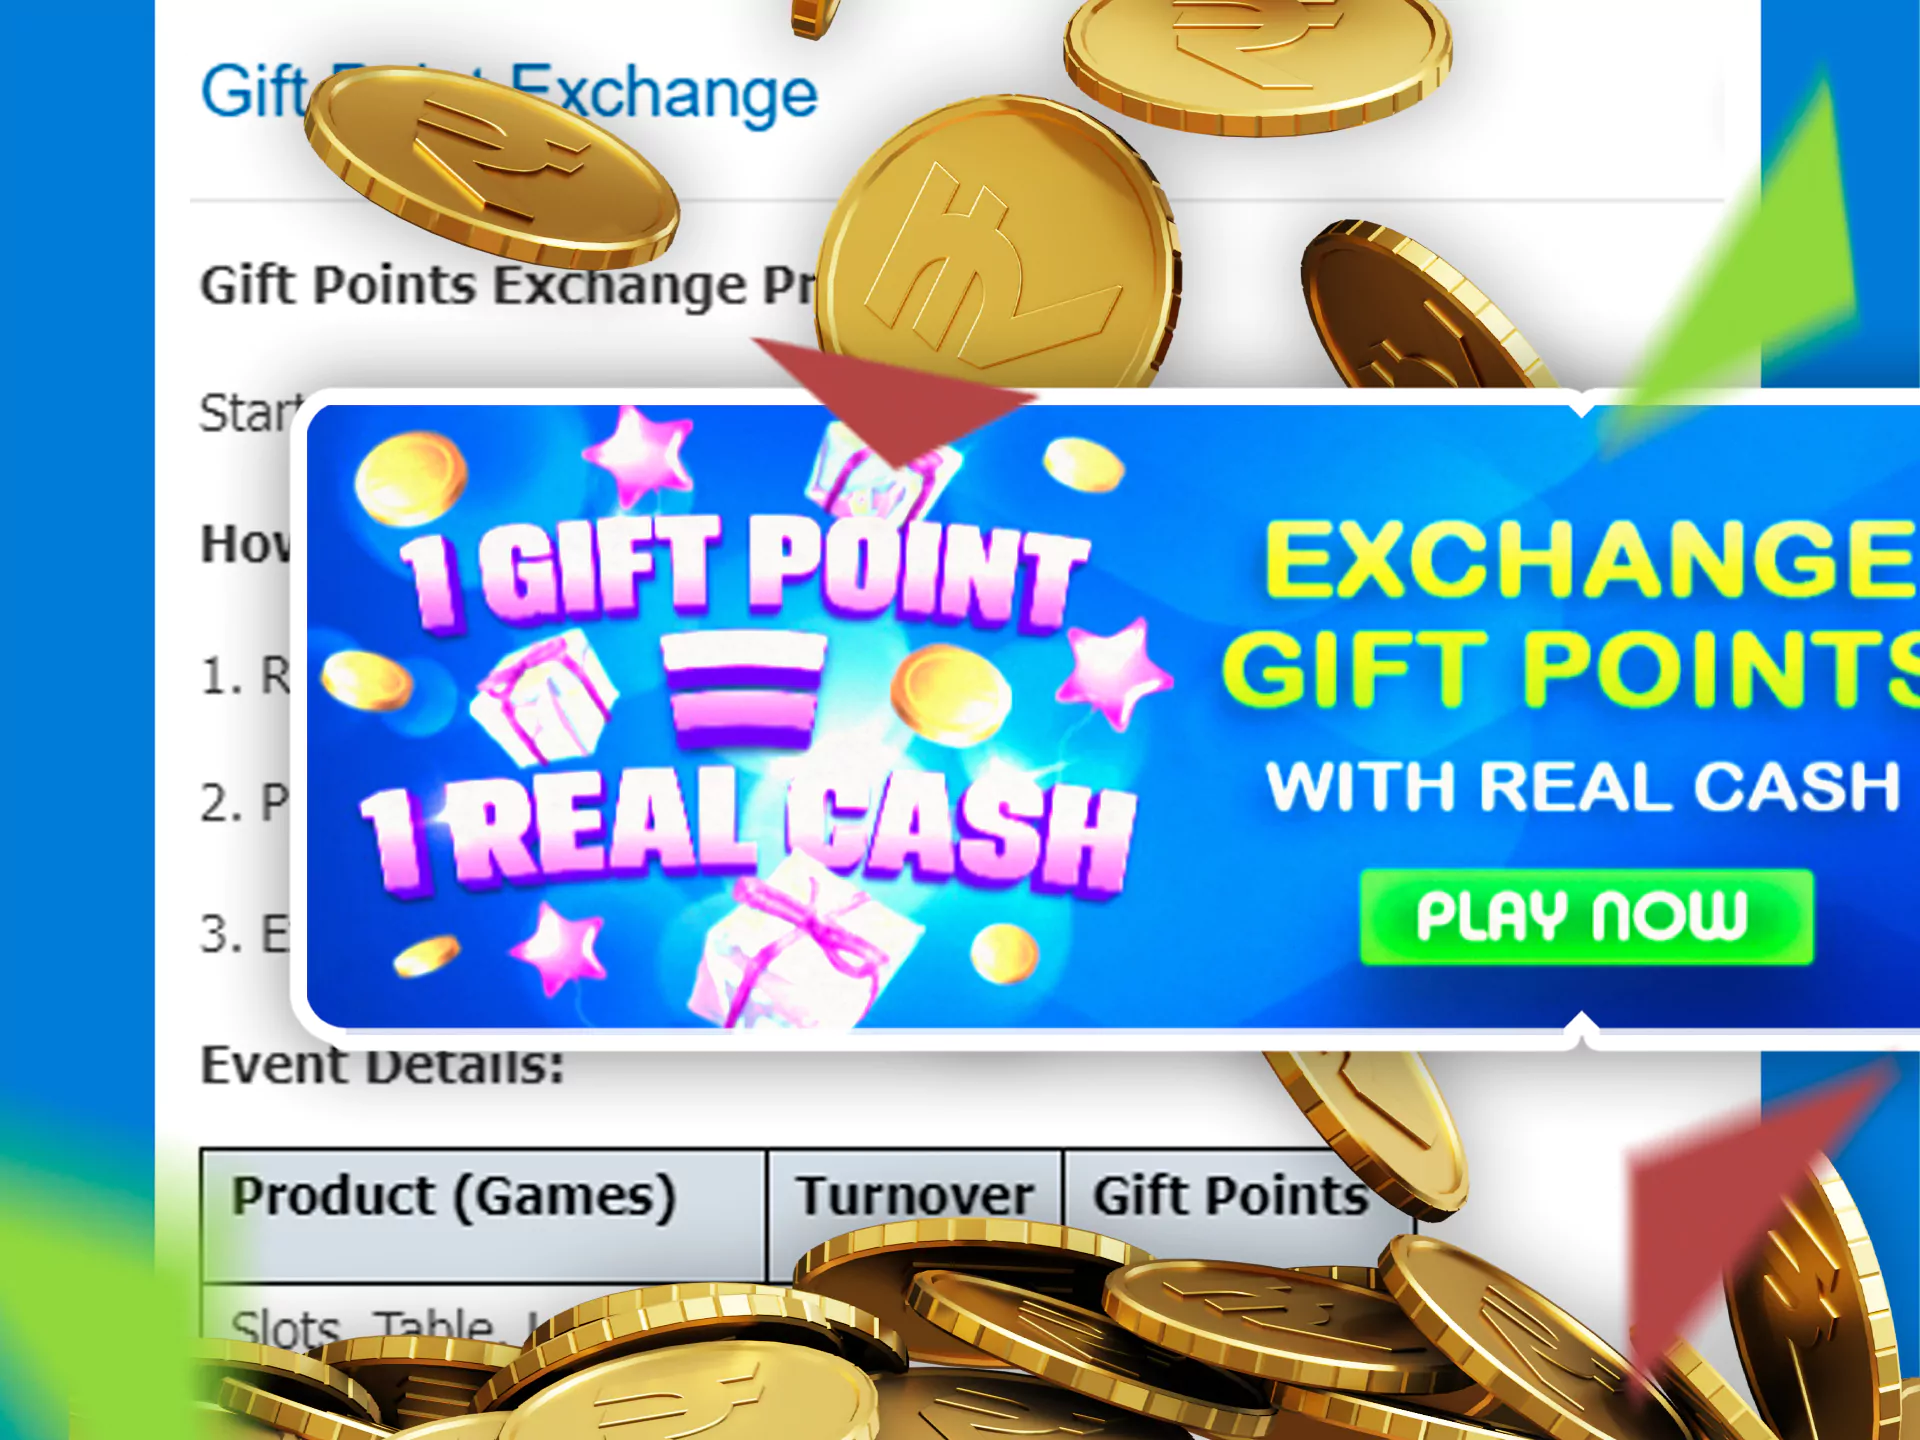 Exchange gift points for real cash at Crickex.